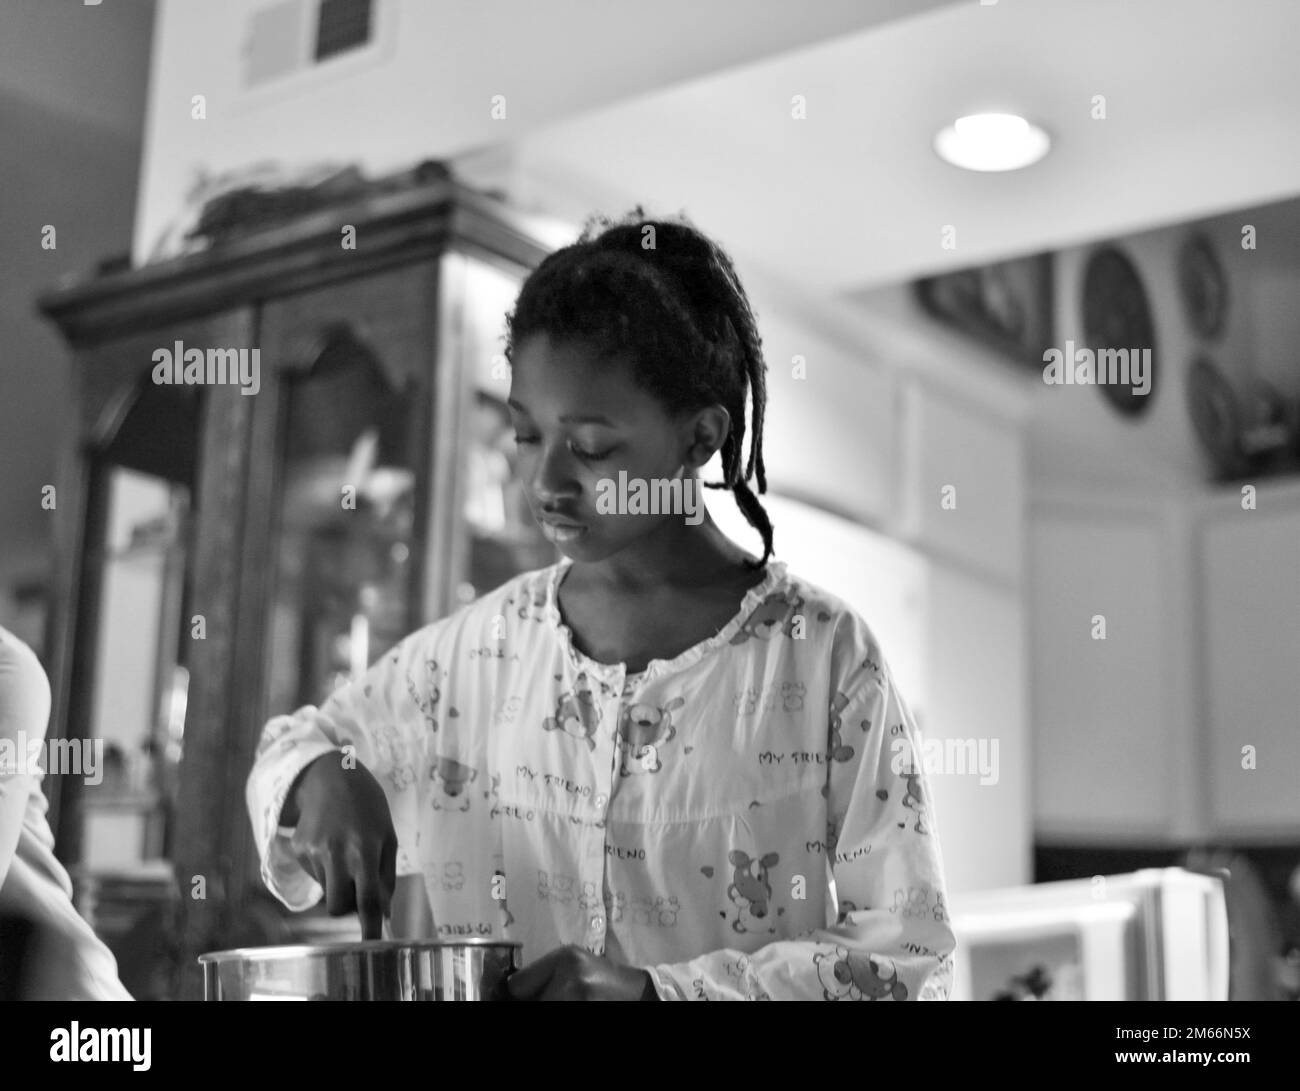 black and white photo of a young girl mixing breakfast ingredients in a shiny stainless steel bowl Stock Photo